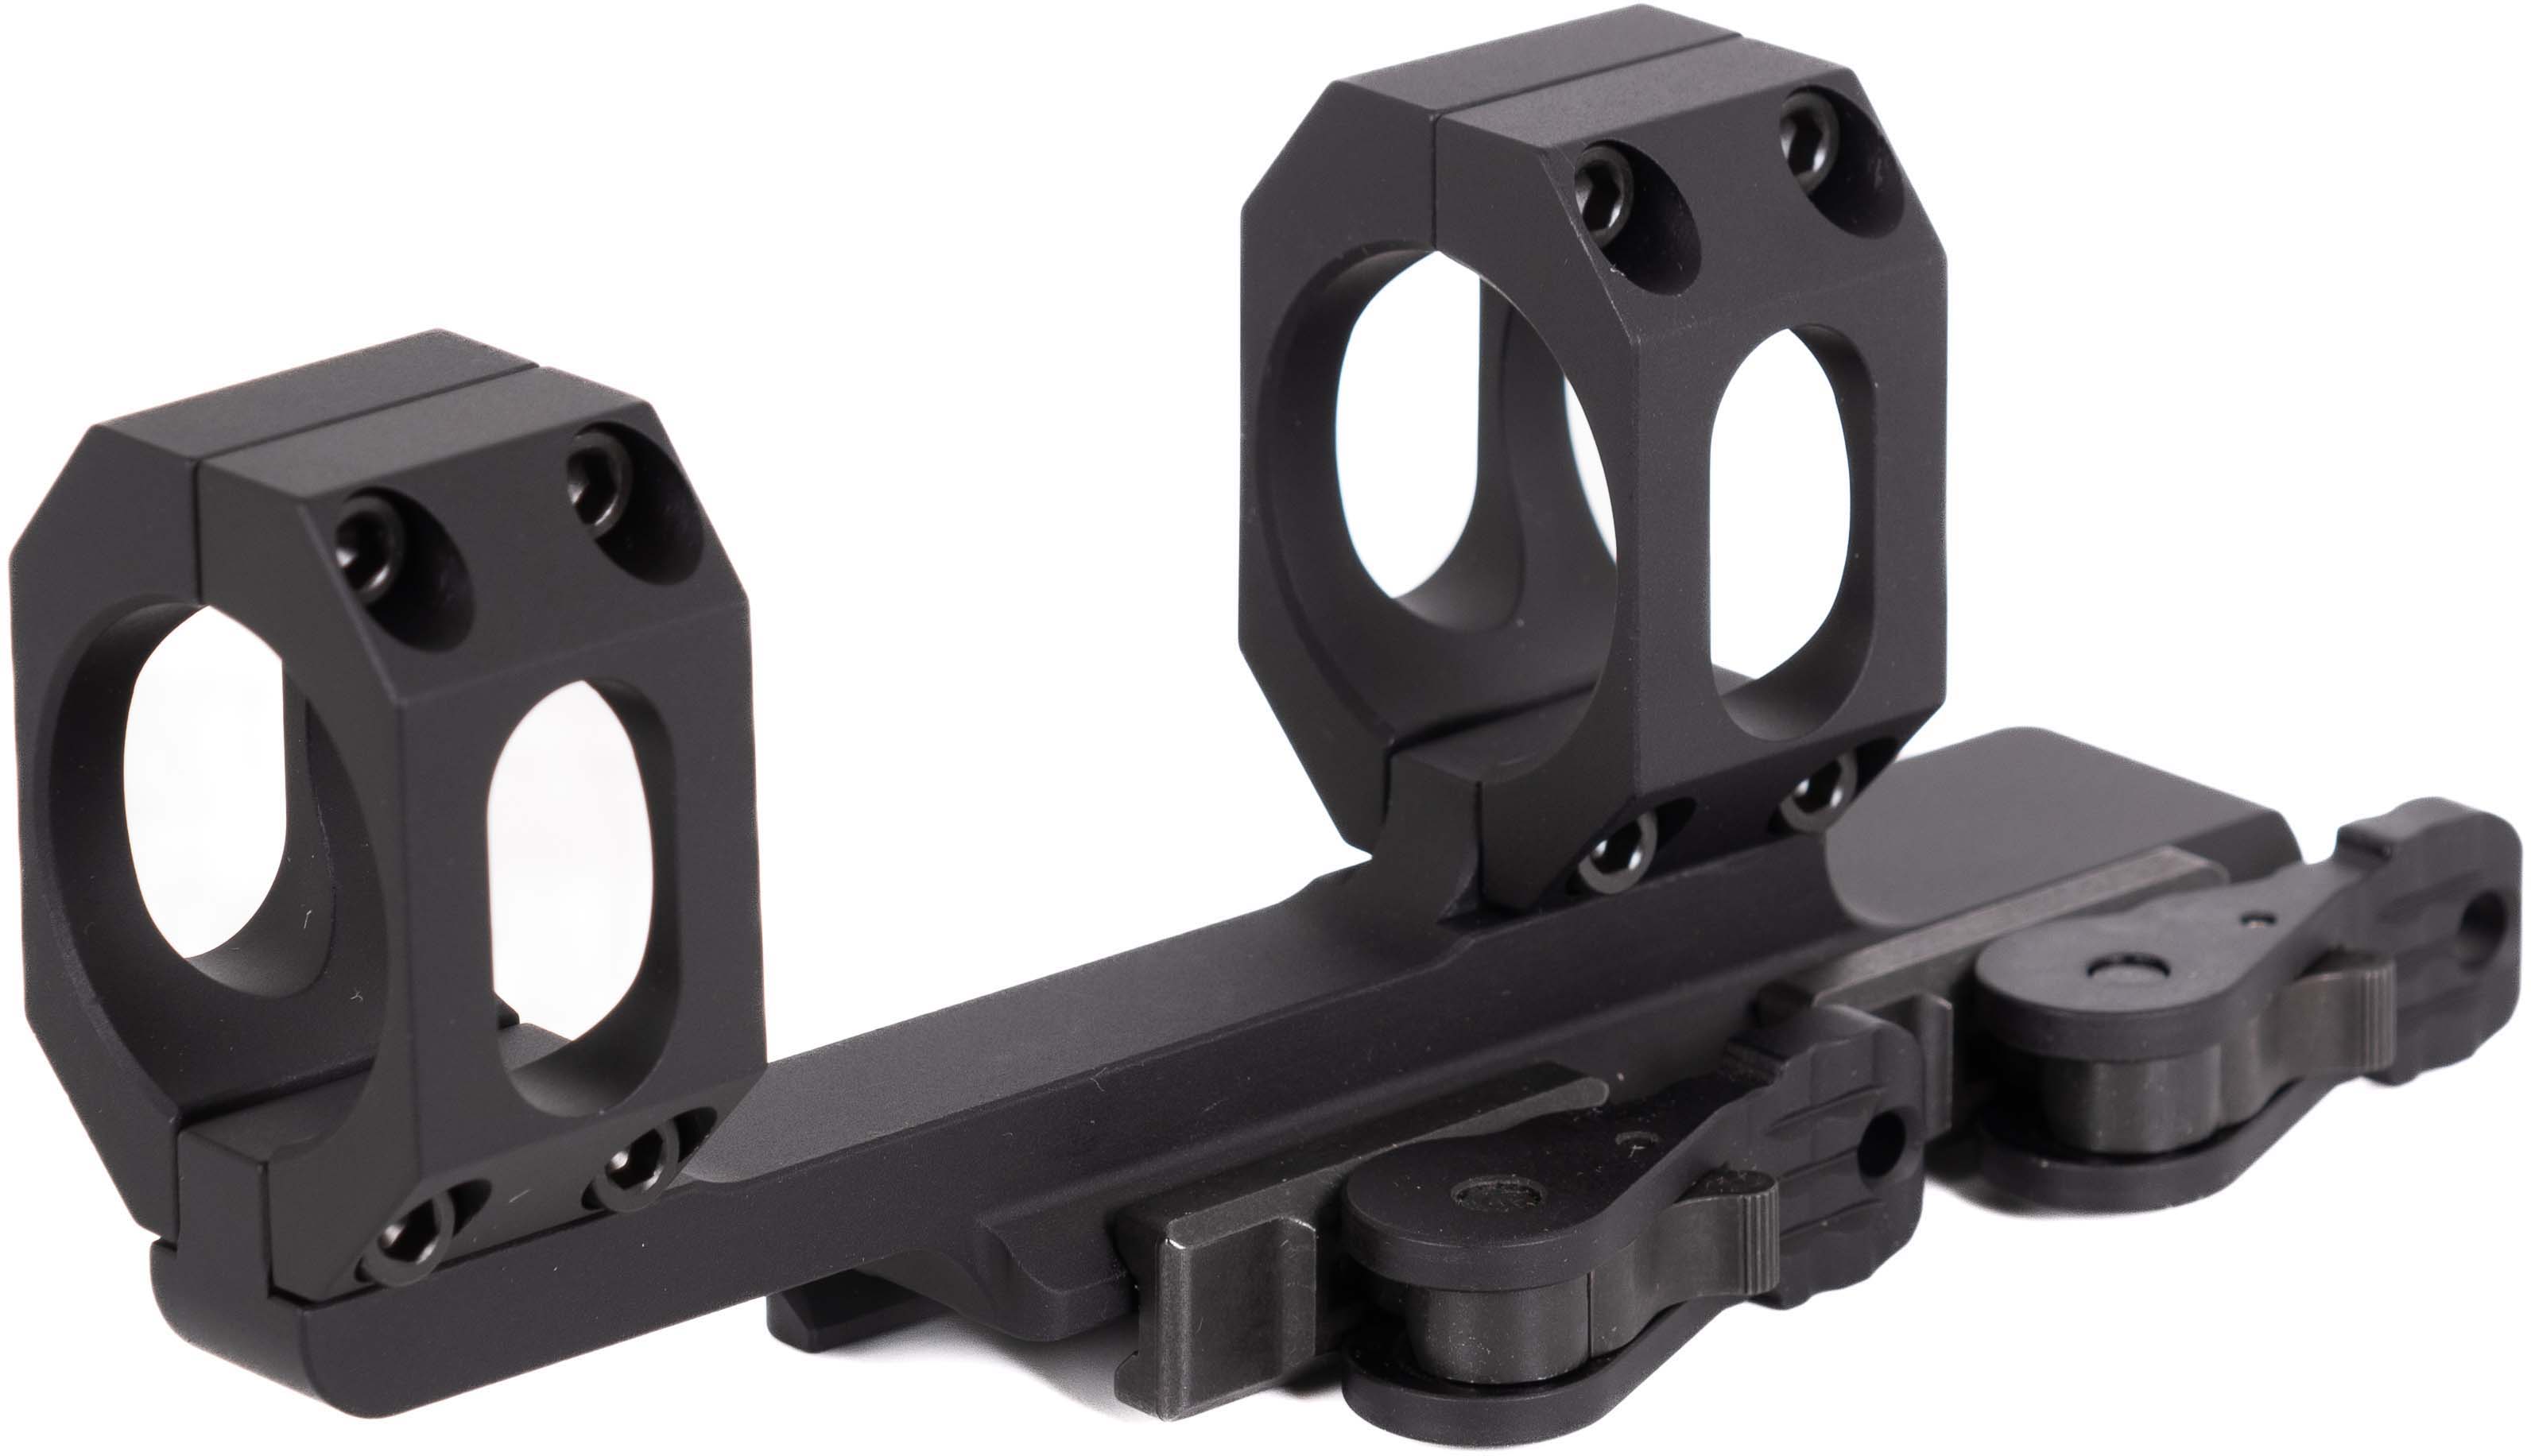 AD-Recon-M Med Height Scope Mount